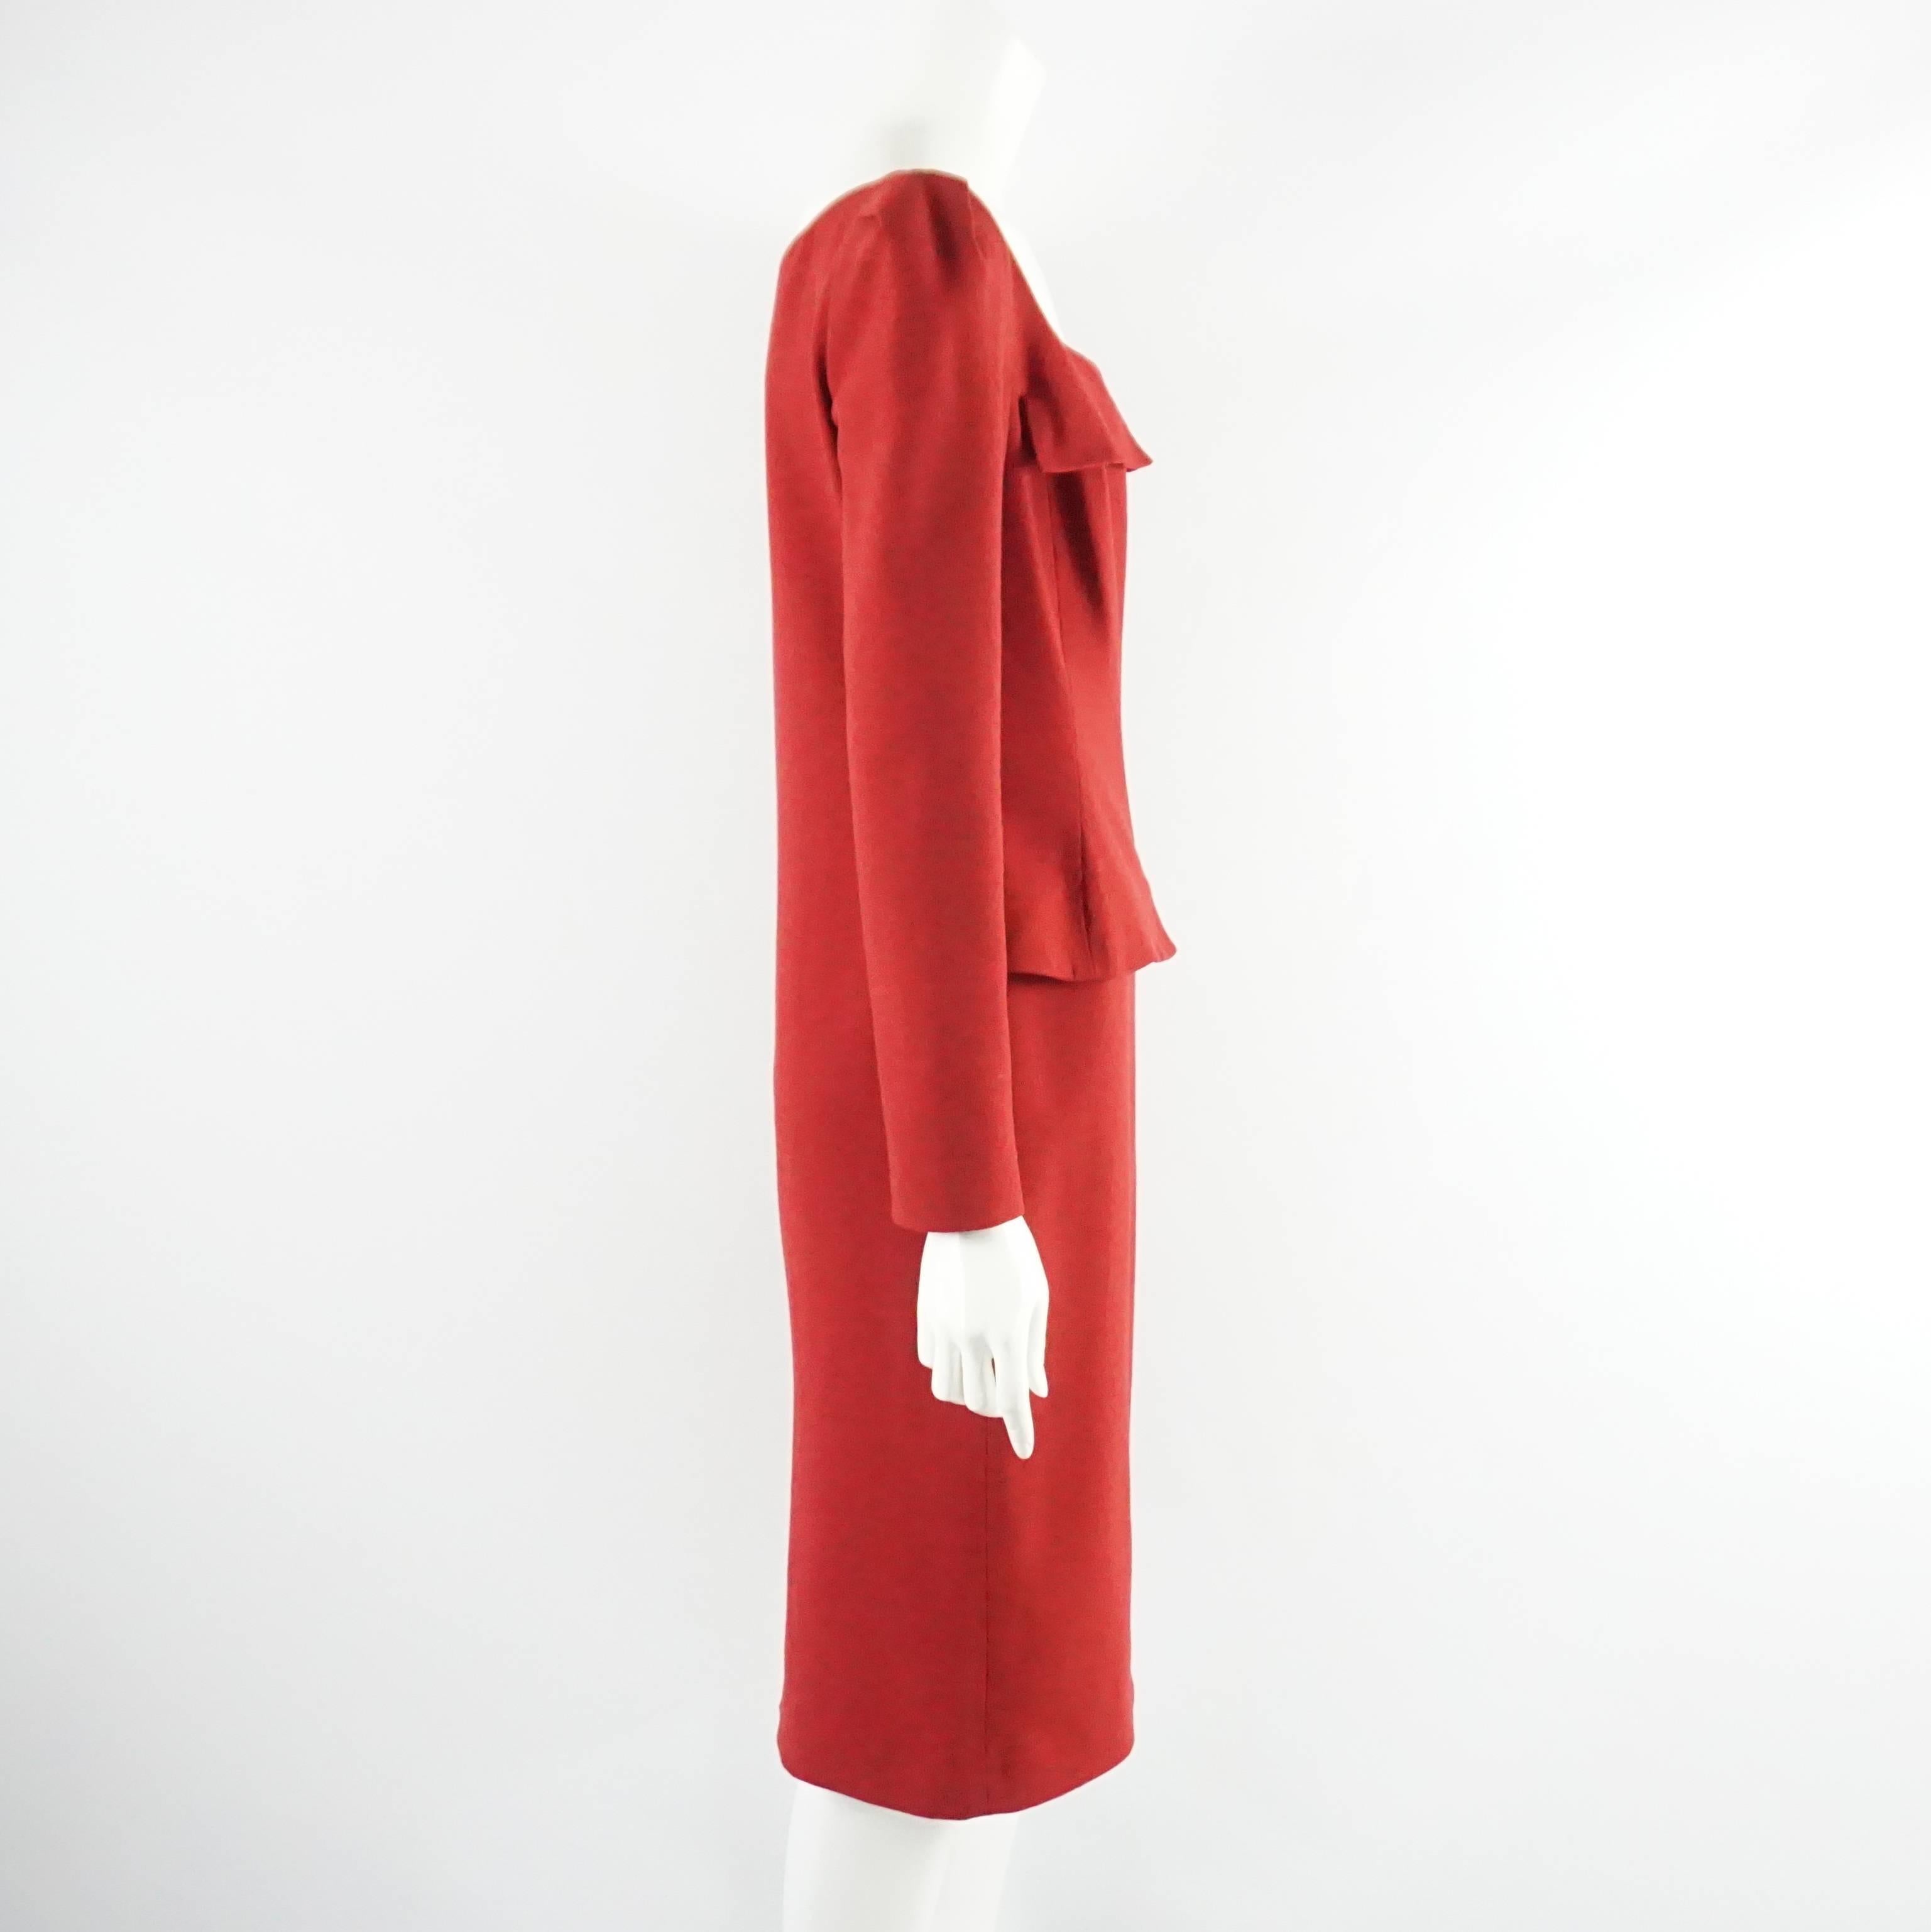 This Alexander McQueen dress is made of red wool. It features long sleeves and a peplum. This dress is in excellent condition.

Measurements
Shoulder to Shoulder: 15